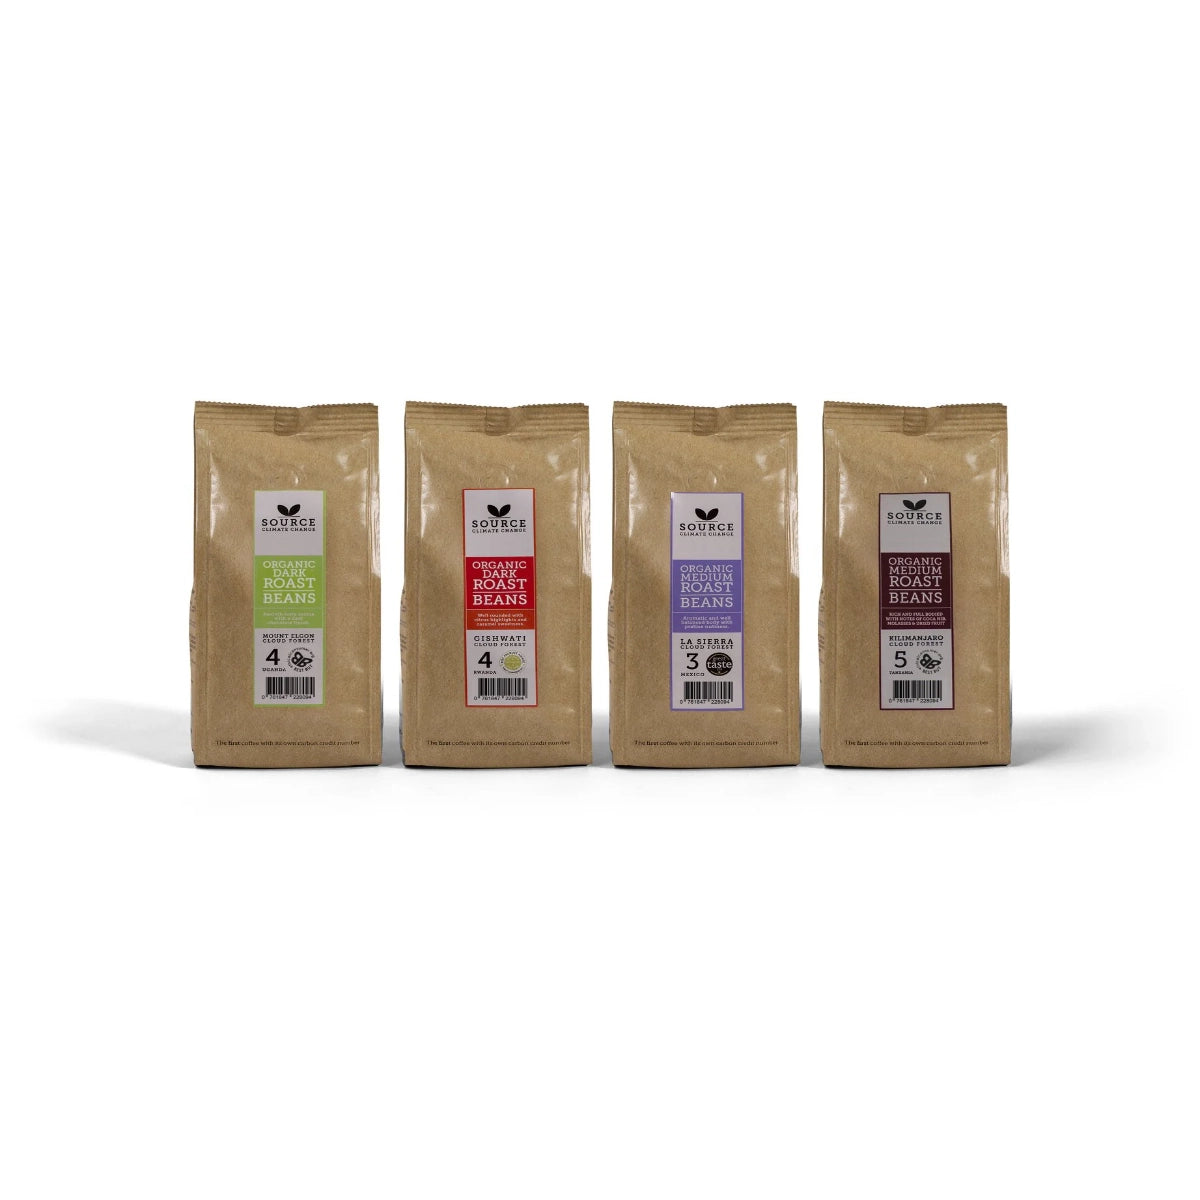 Taste Collection Gift Pack of Organic Single Origins Coffees - Source Climate Change Coffee